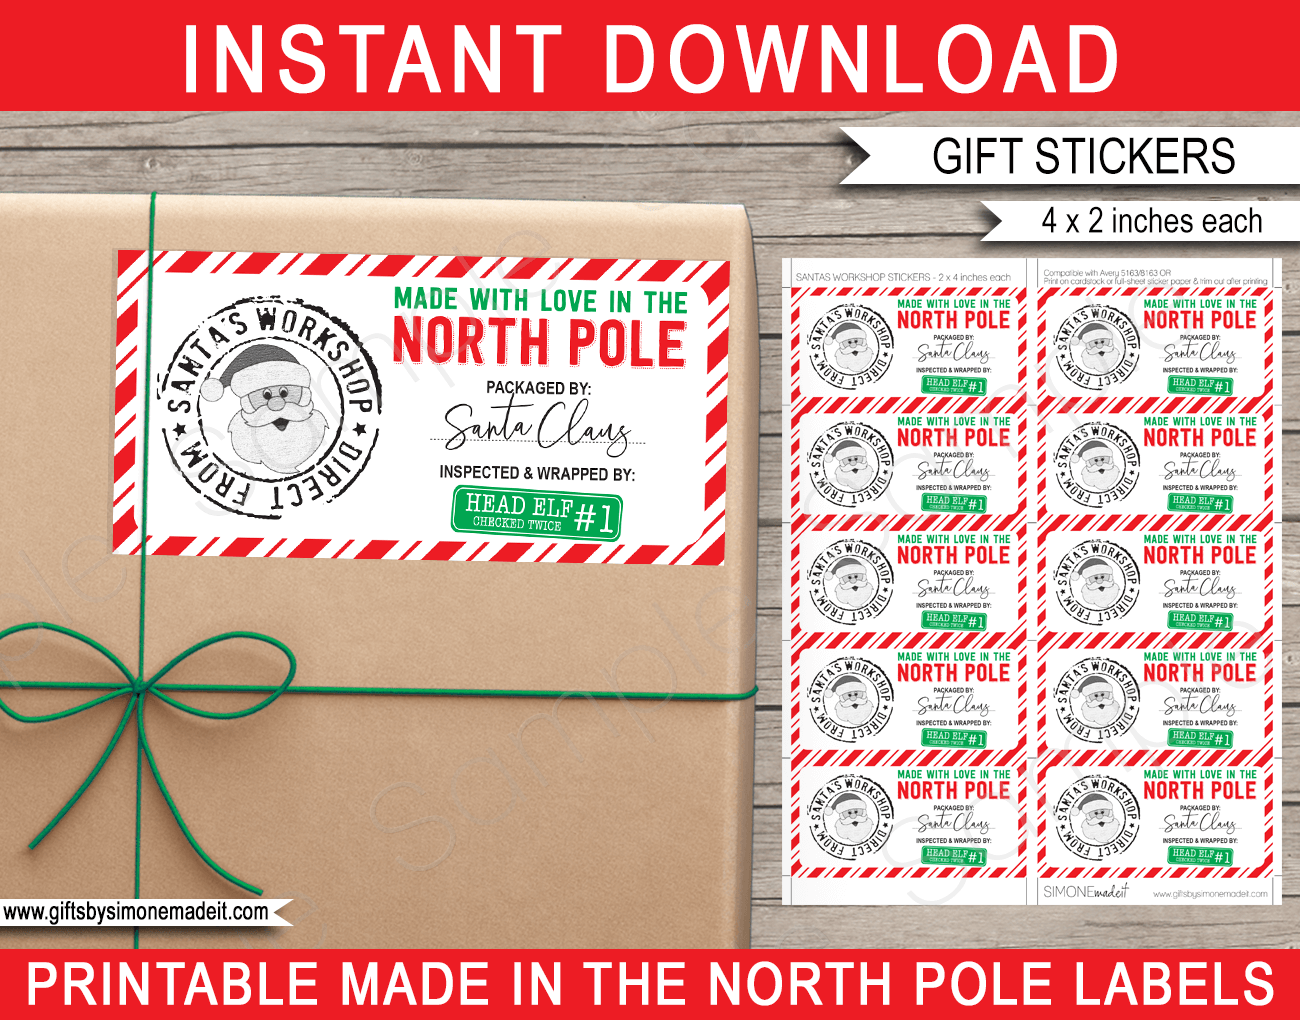 https://www.giftsbysimonemadeit.com/wp-content/uploads/2020/11/Christmas-Made-in-North-Pole-Stickers-Printable-Template.png